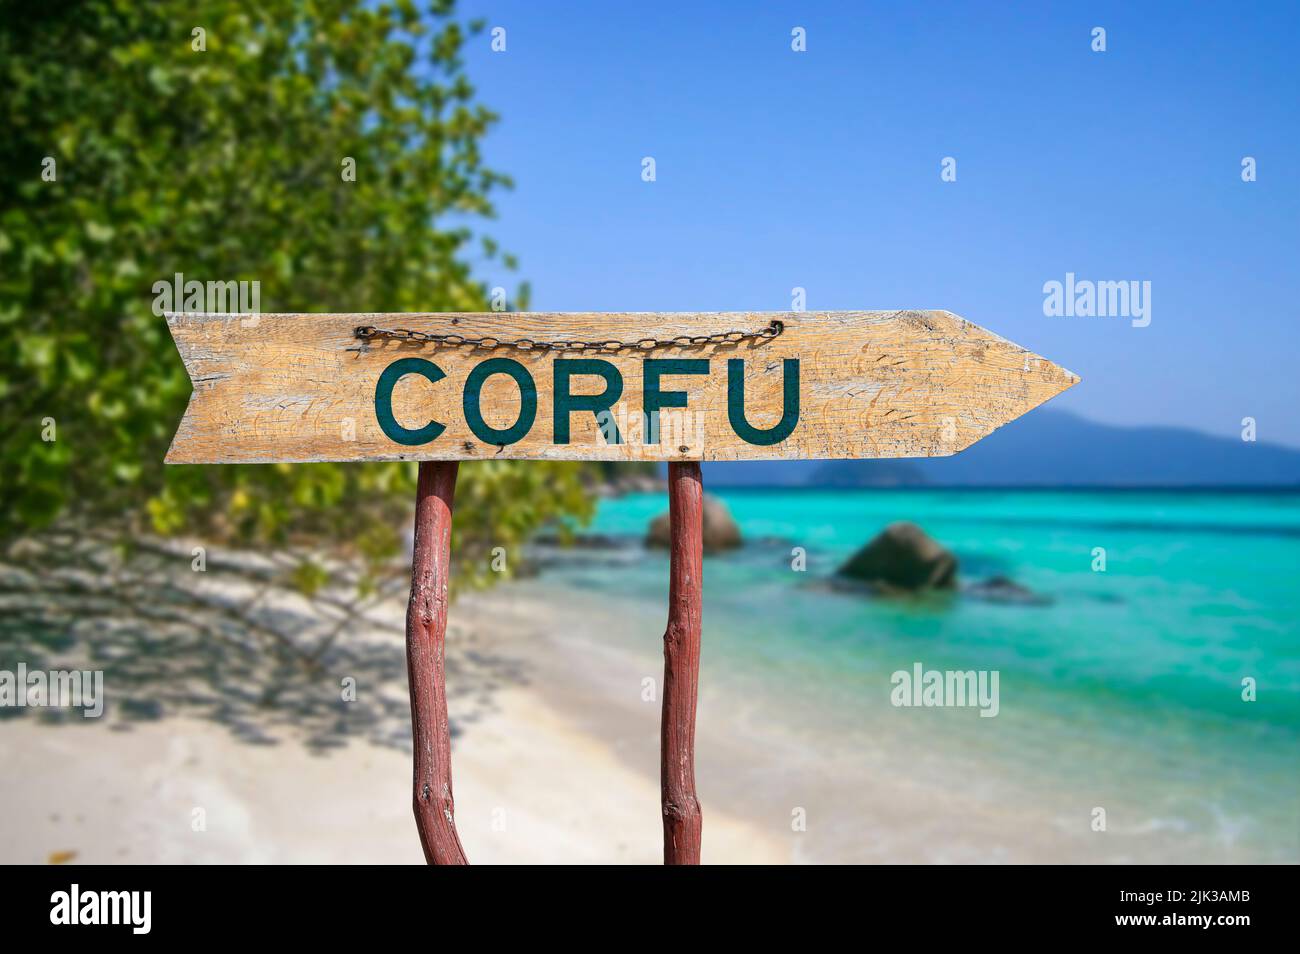 Corfu wooden arrow road sign against beach with white sand and turquoise water background. Travel to Greece concept. Stock Photo